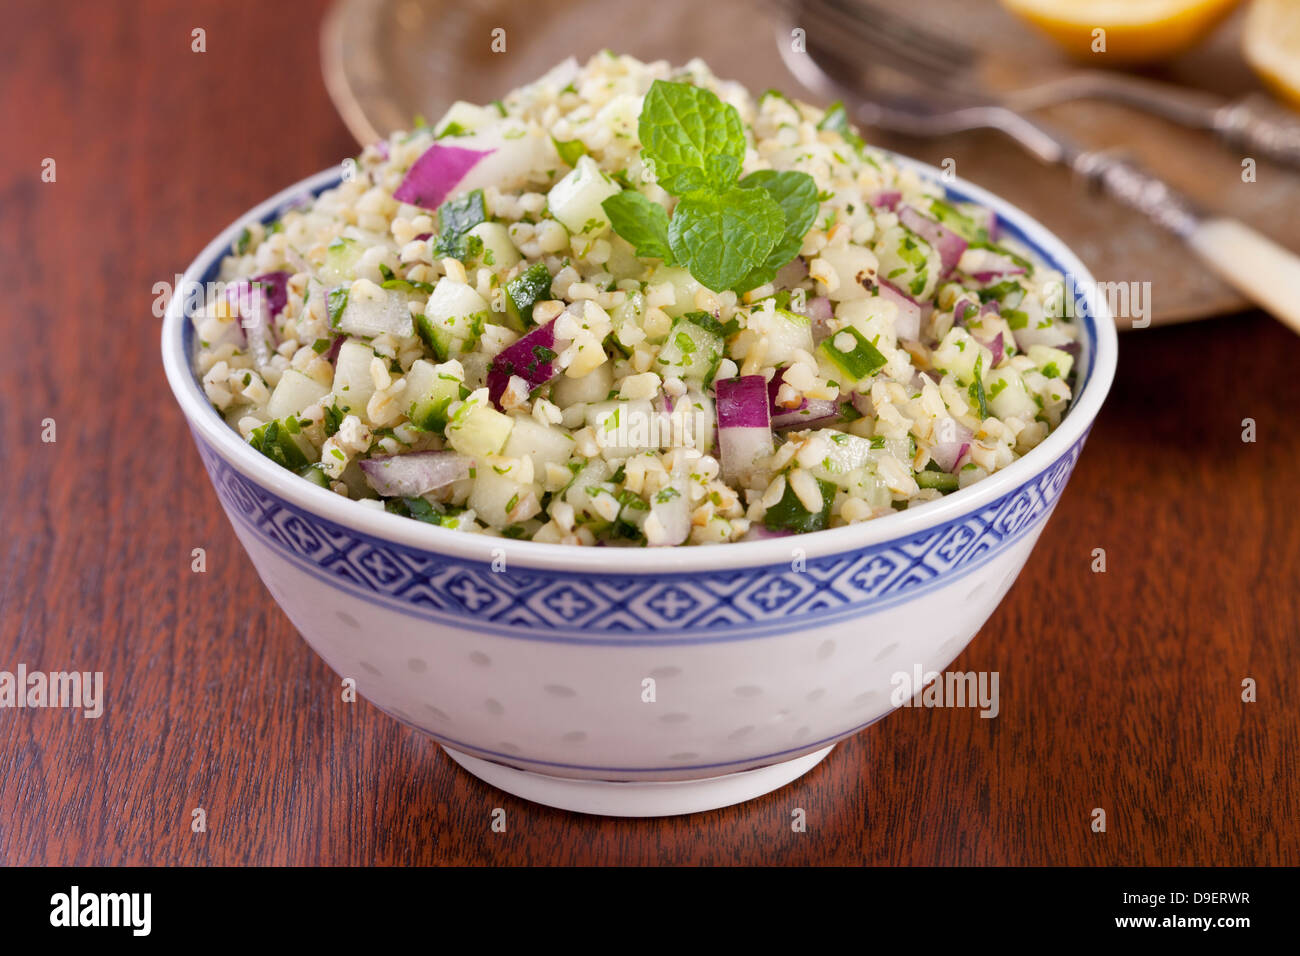 Tabbouleh made from bulgur wheat, mint, coriander, cucumber, and red onion. Stock Photo